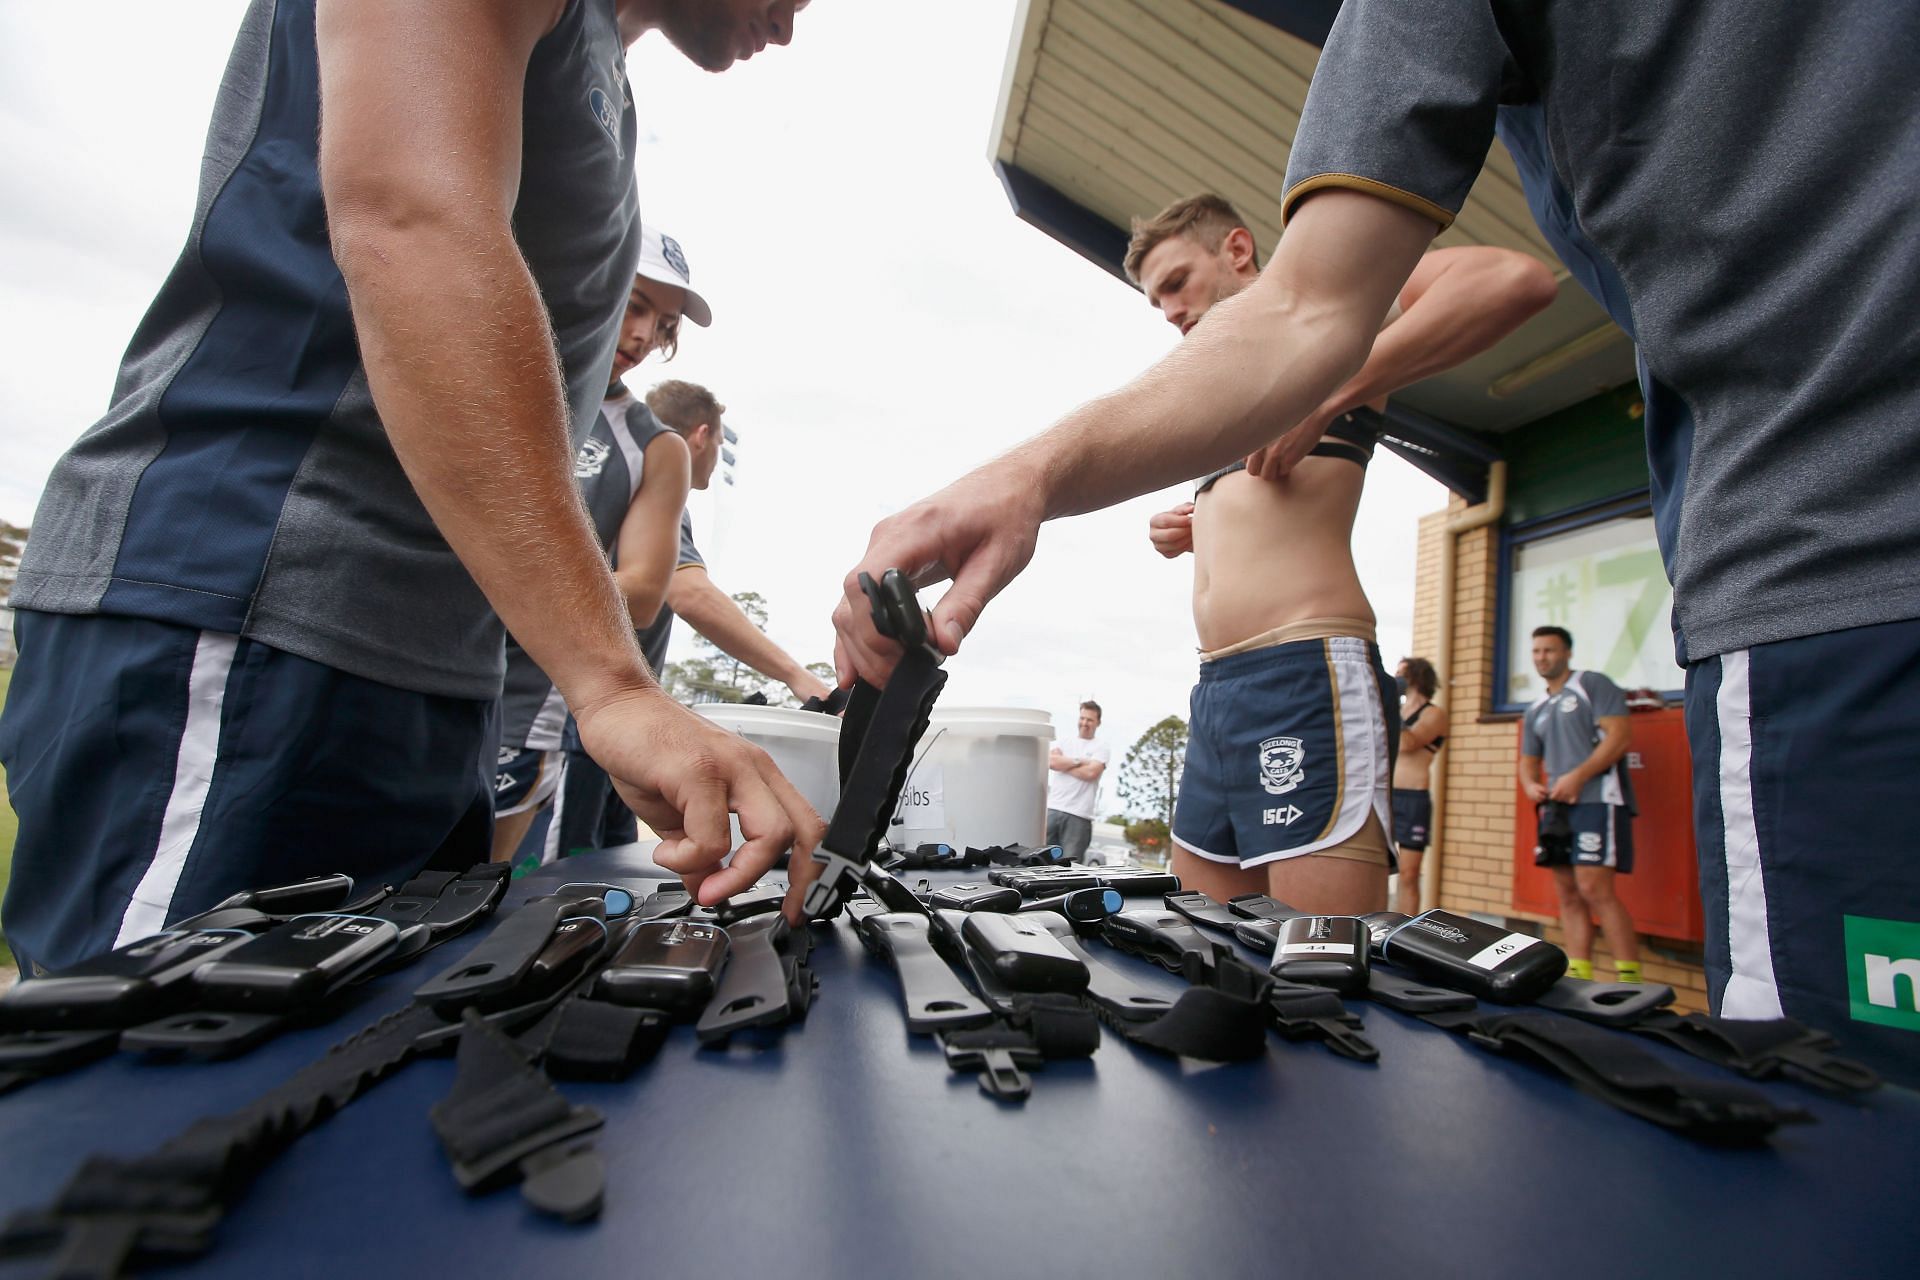 Assembling the Heart rate monitors before the training practice (Image via Getty)